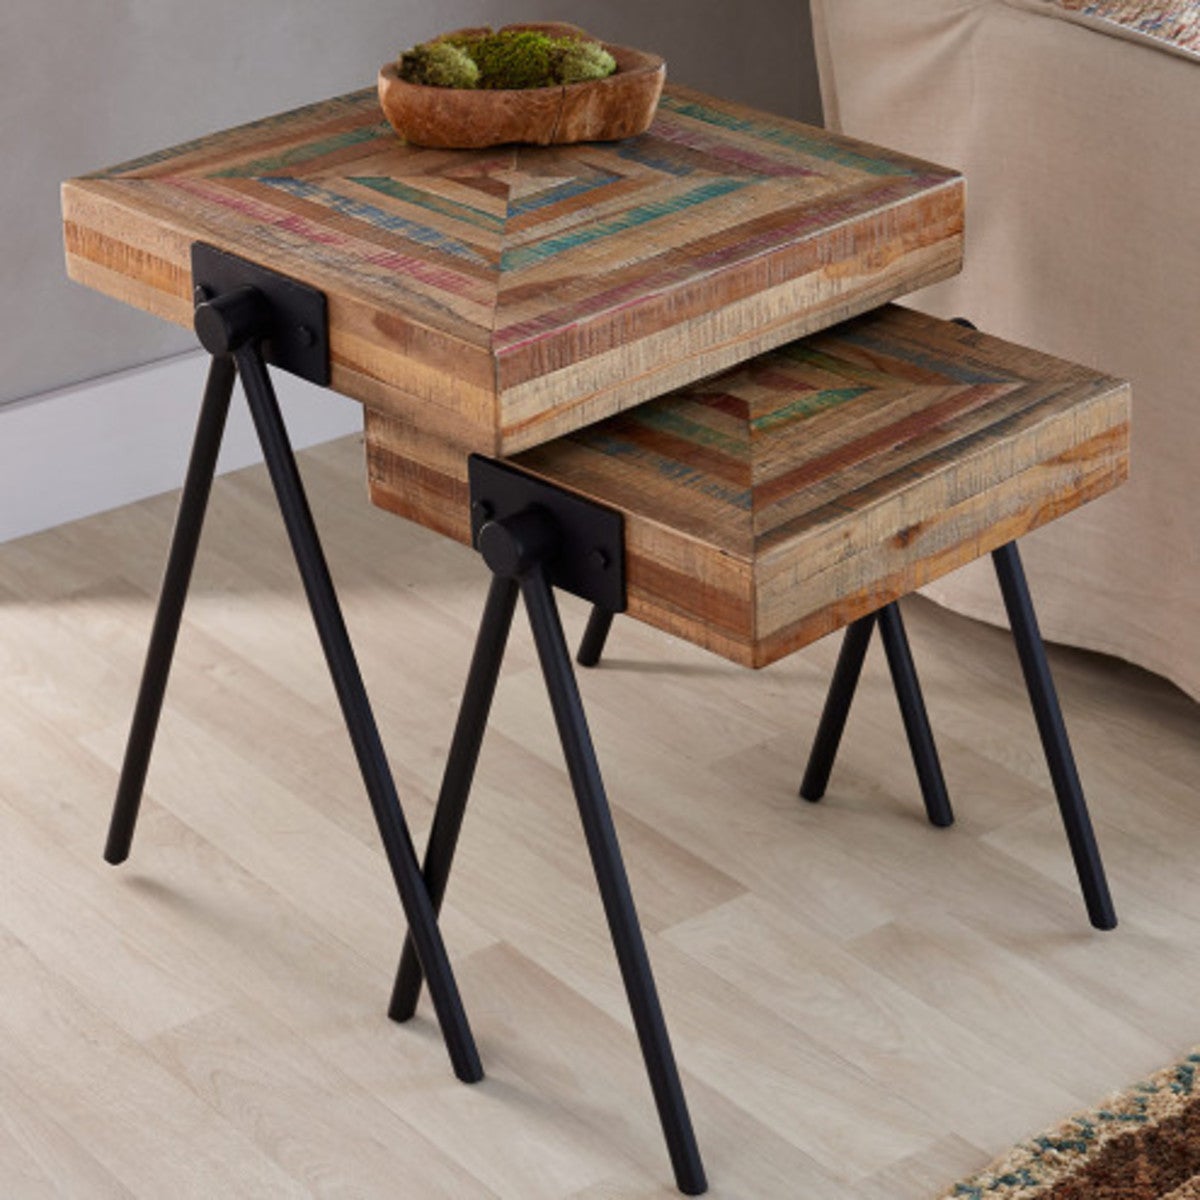 Colorful Wooden Nesting Tables Furniture By Category ...